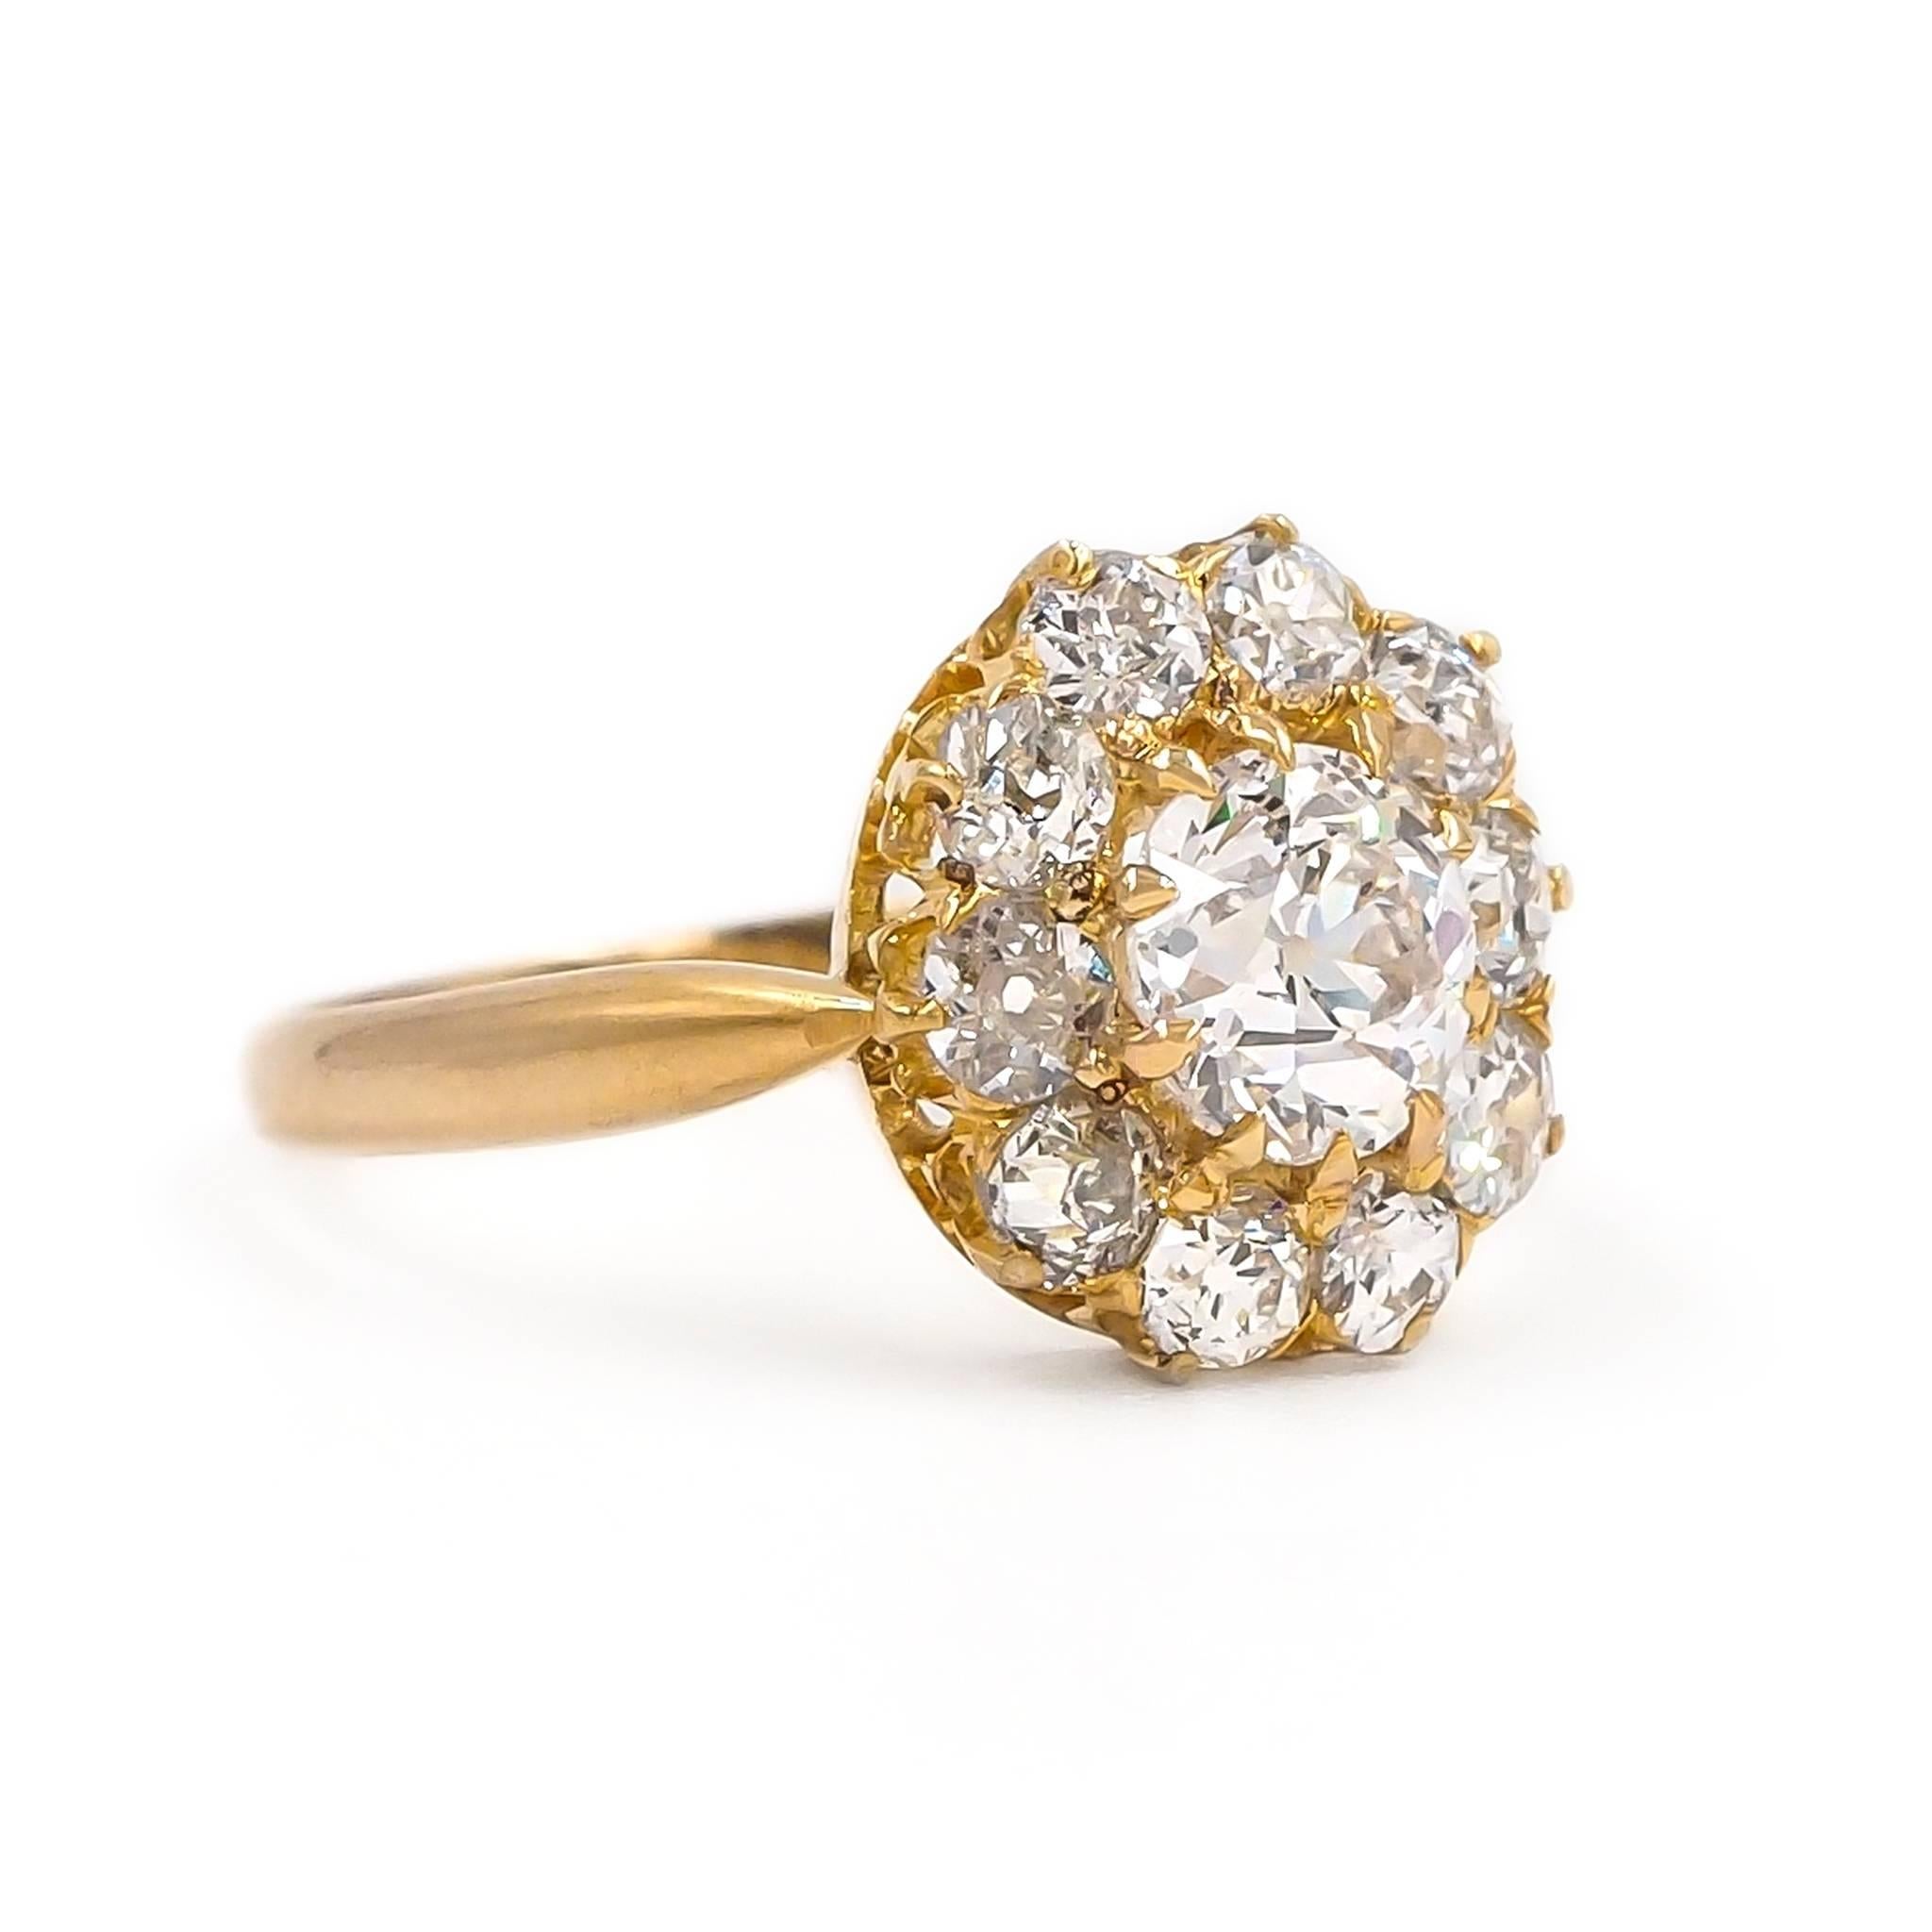 A classic Cluster Ring of French Origin composed of 18 Karat Yellow Gold. This Victorian era ring (circa 1890) features a center stone 1.26 Carat Old European Cut Diamond. Surrounded by 10 Old Mine Cut Diamonds weighing 1.20 Cts in total.  A